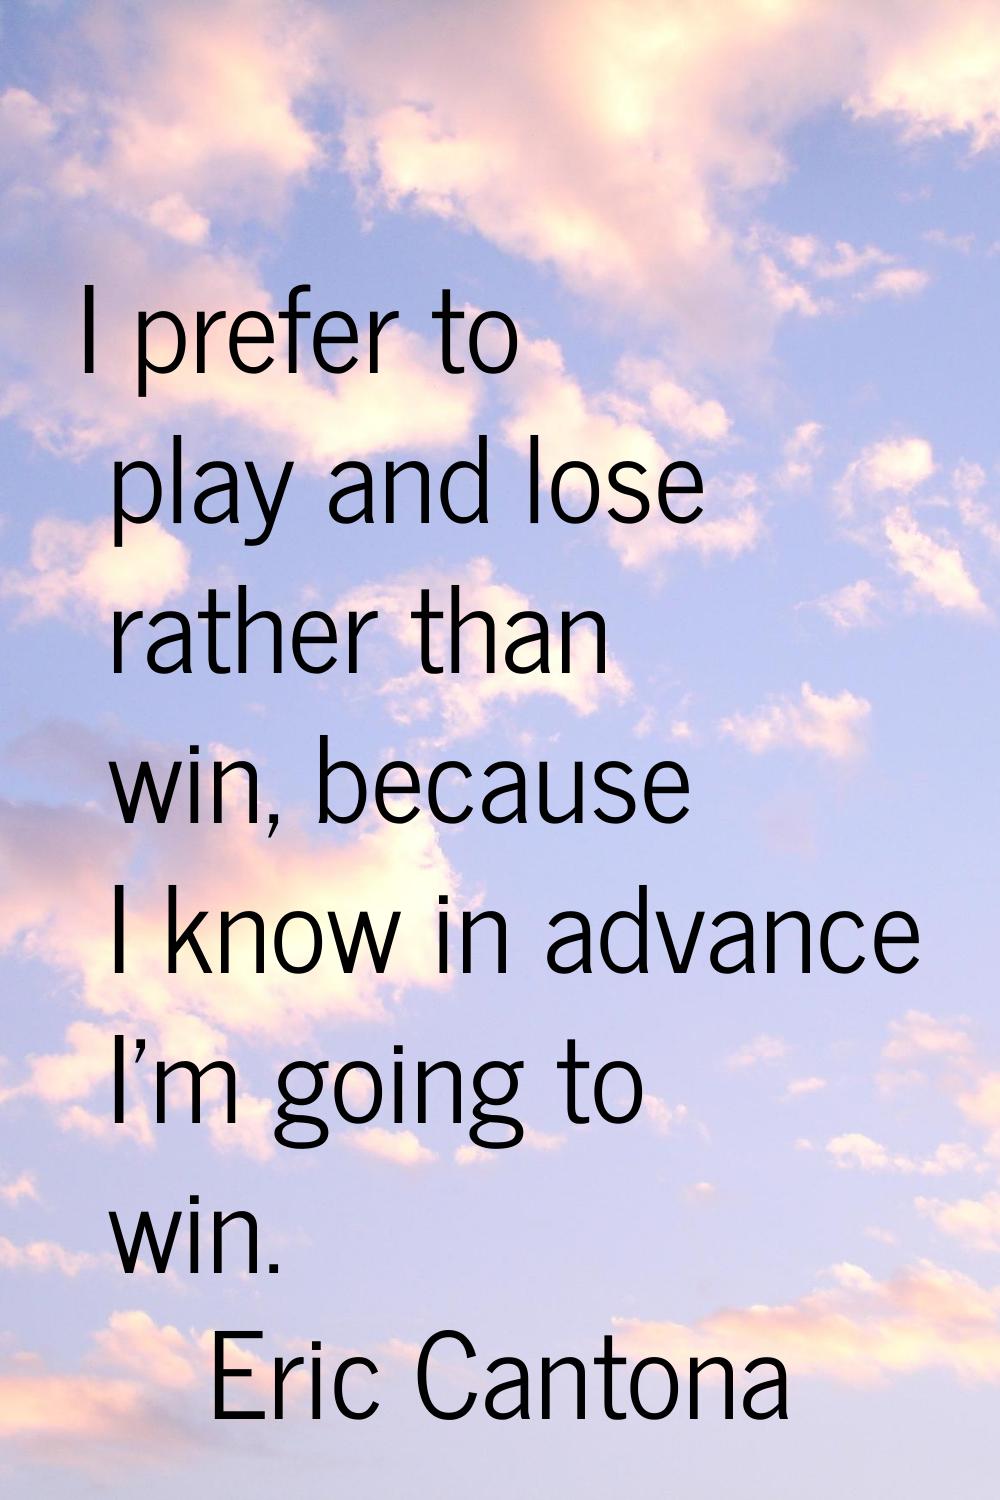 I prefer to play and lose rather than win, because I know in advance I'm going to win.